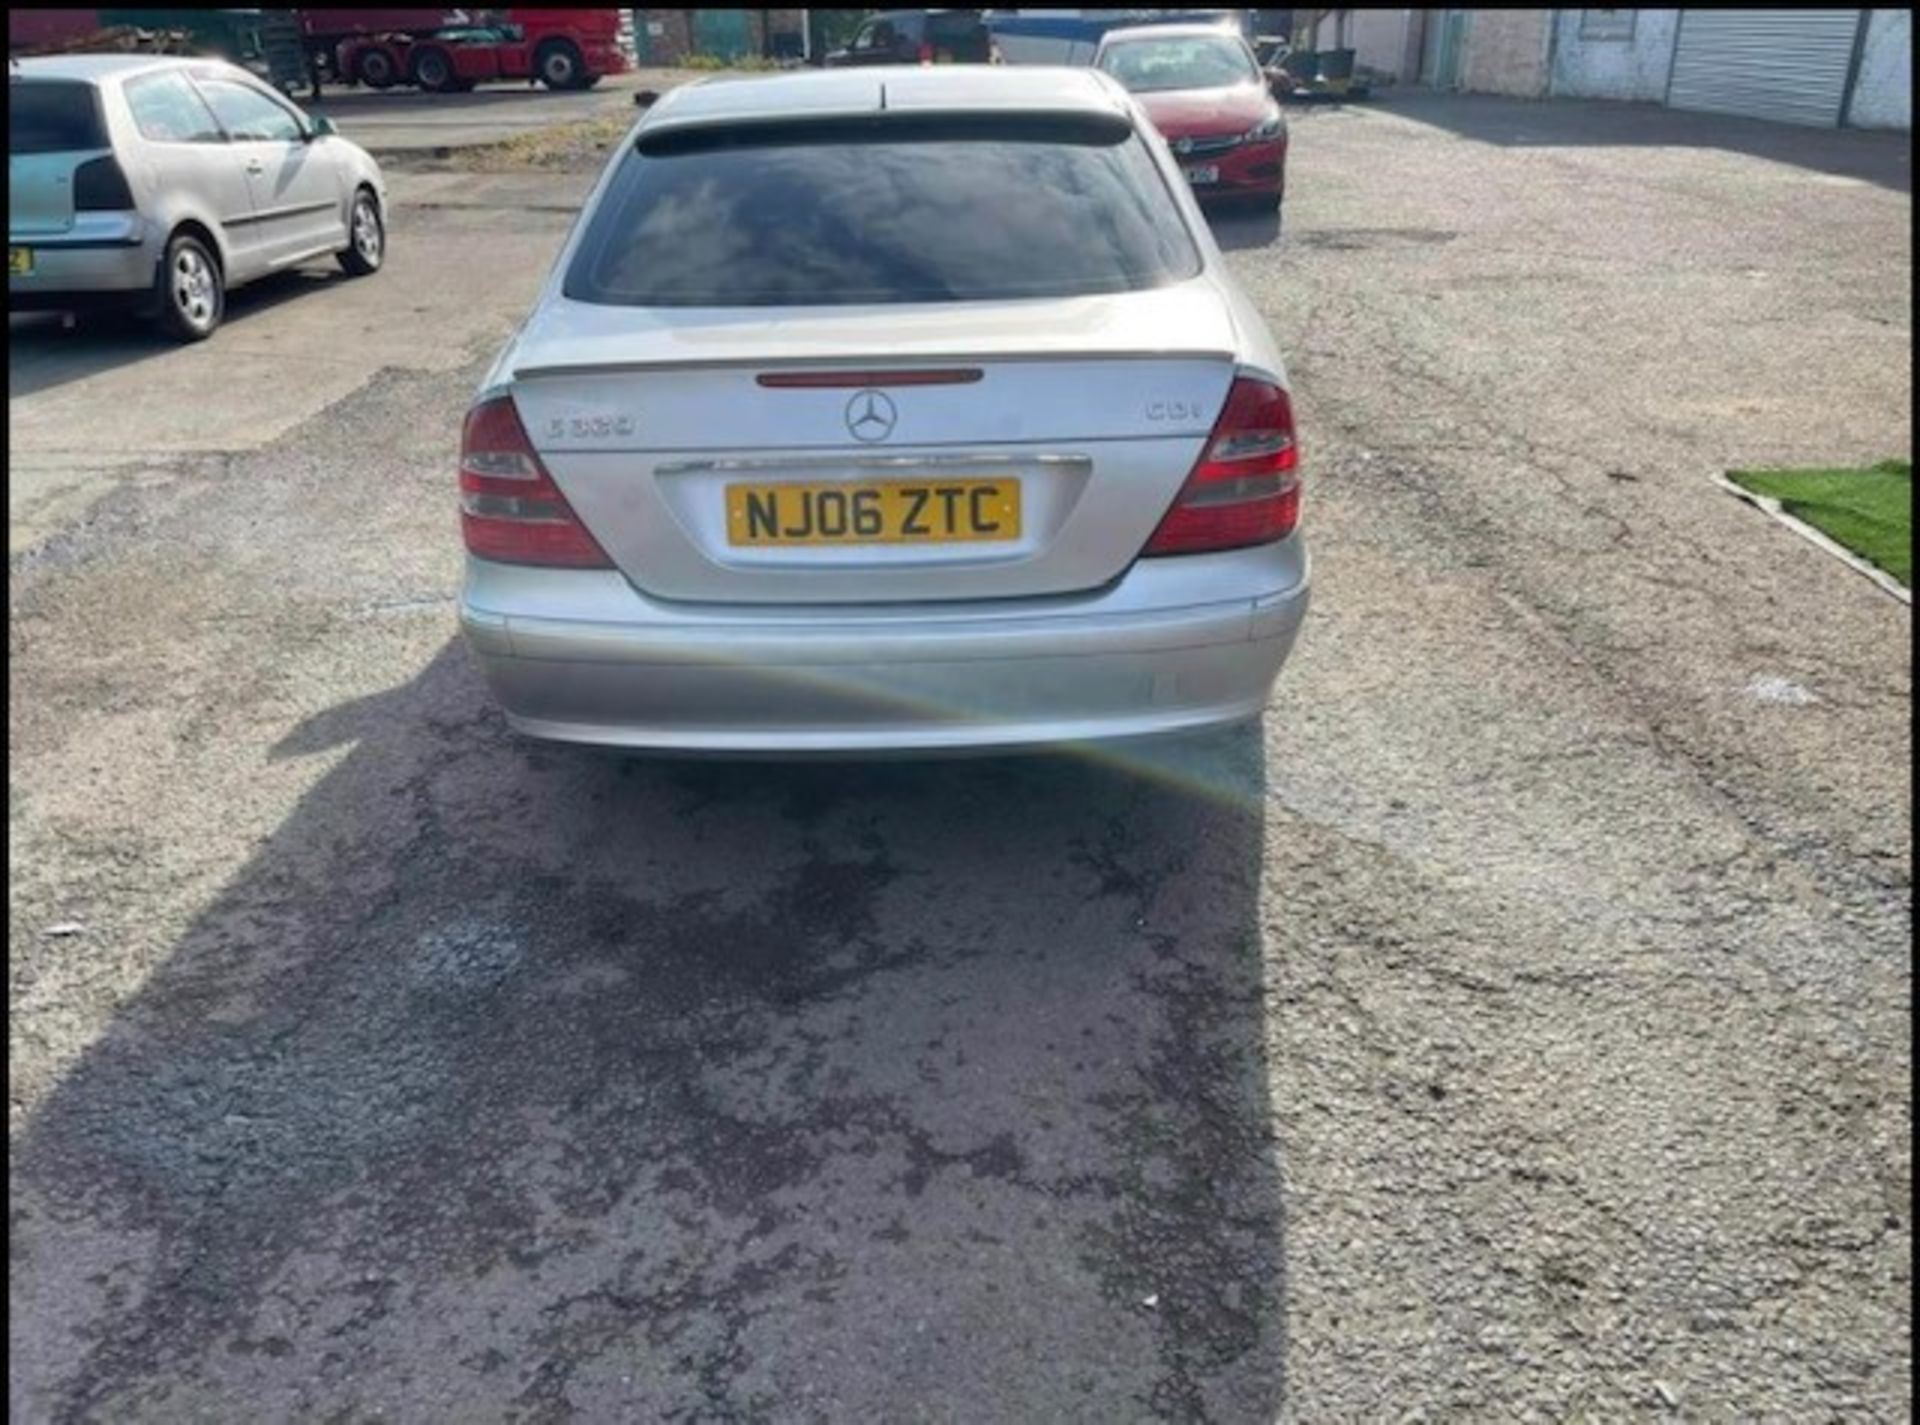 Mercedes E320 CDI 103k genuine miles , mot untill aug 23 as per pictures has scratches as shown in - Image 4 of 14